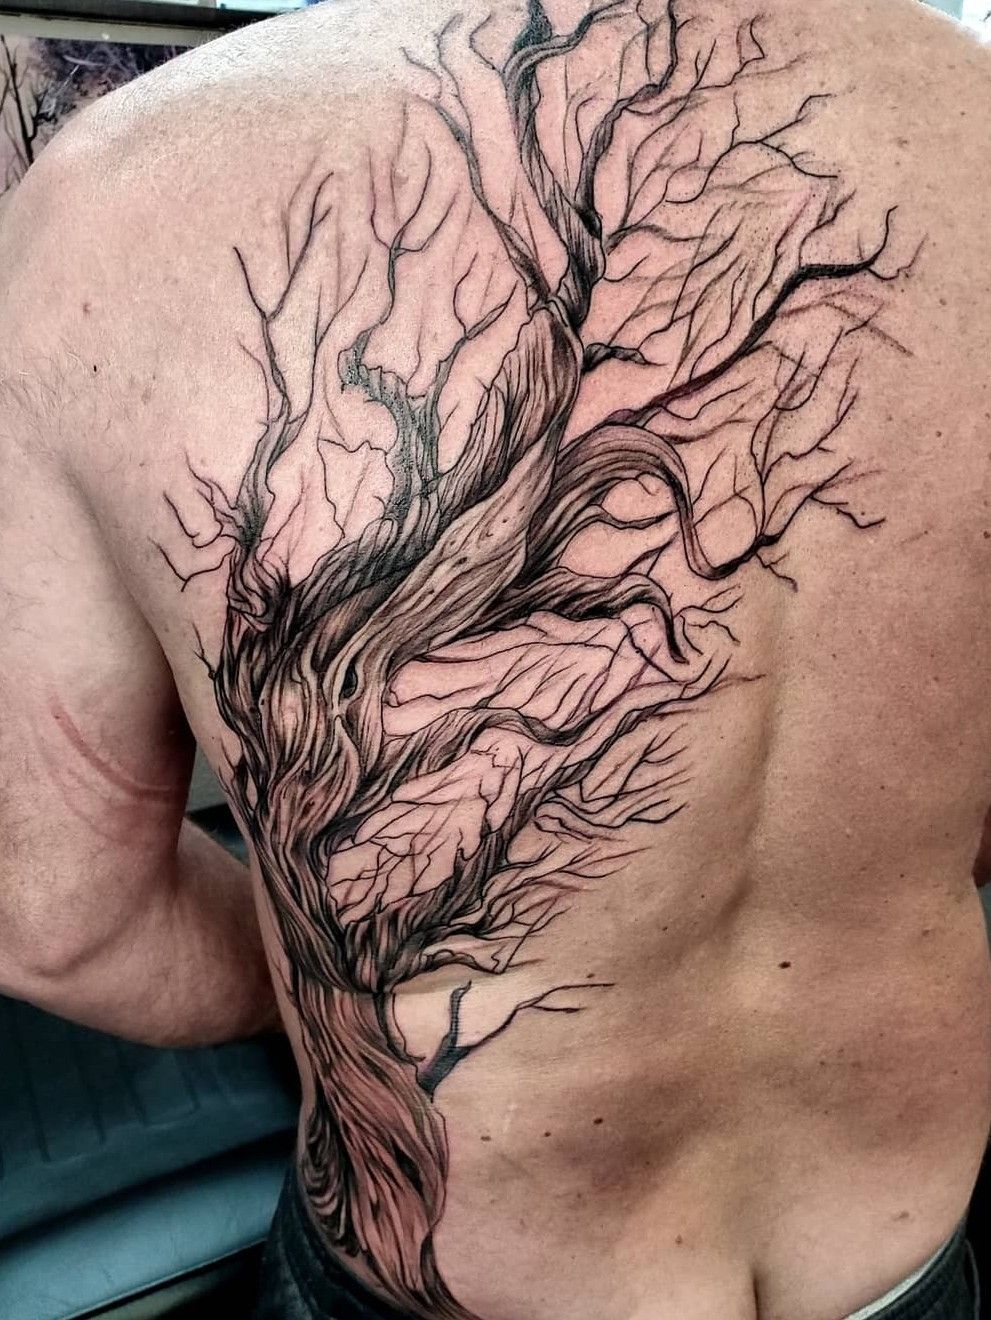 Tattoo uploaded by caleb brouk • The first session on this freehand tree.  Amazed at how well he sat through it all! Its definetely a BIG tree!  #treetattoo #backtattoo #sidetattoo #freehand #tree #